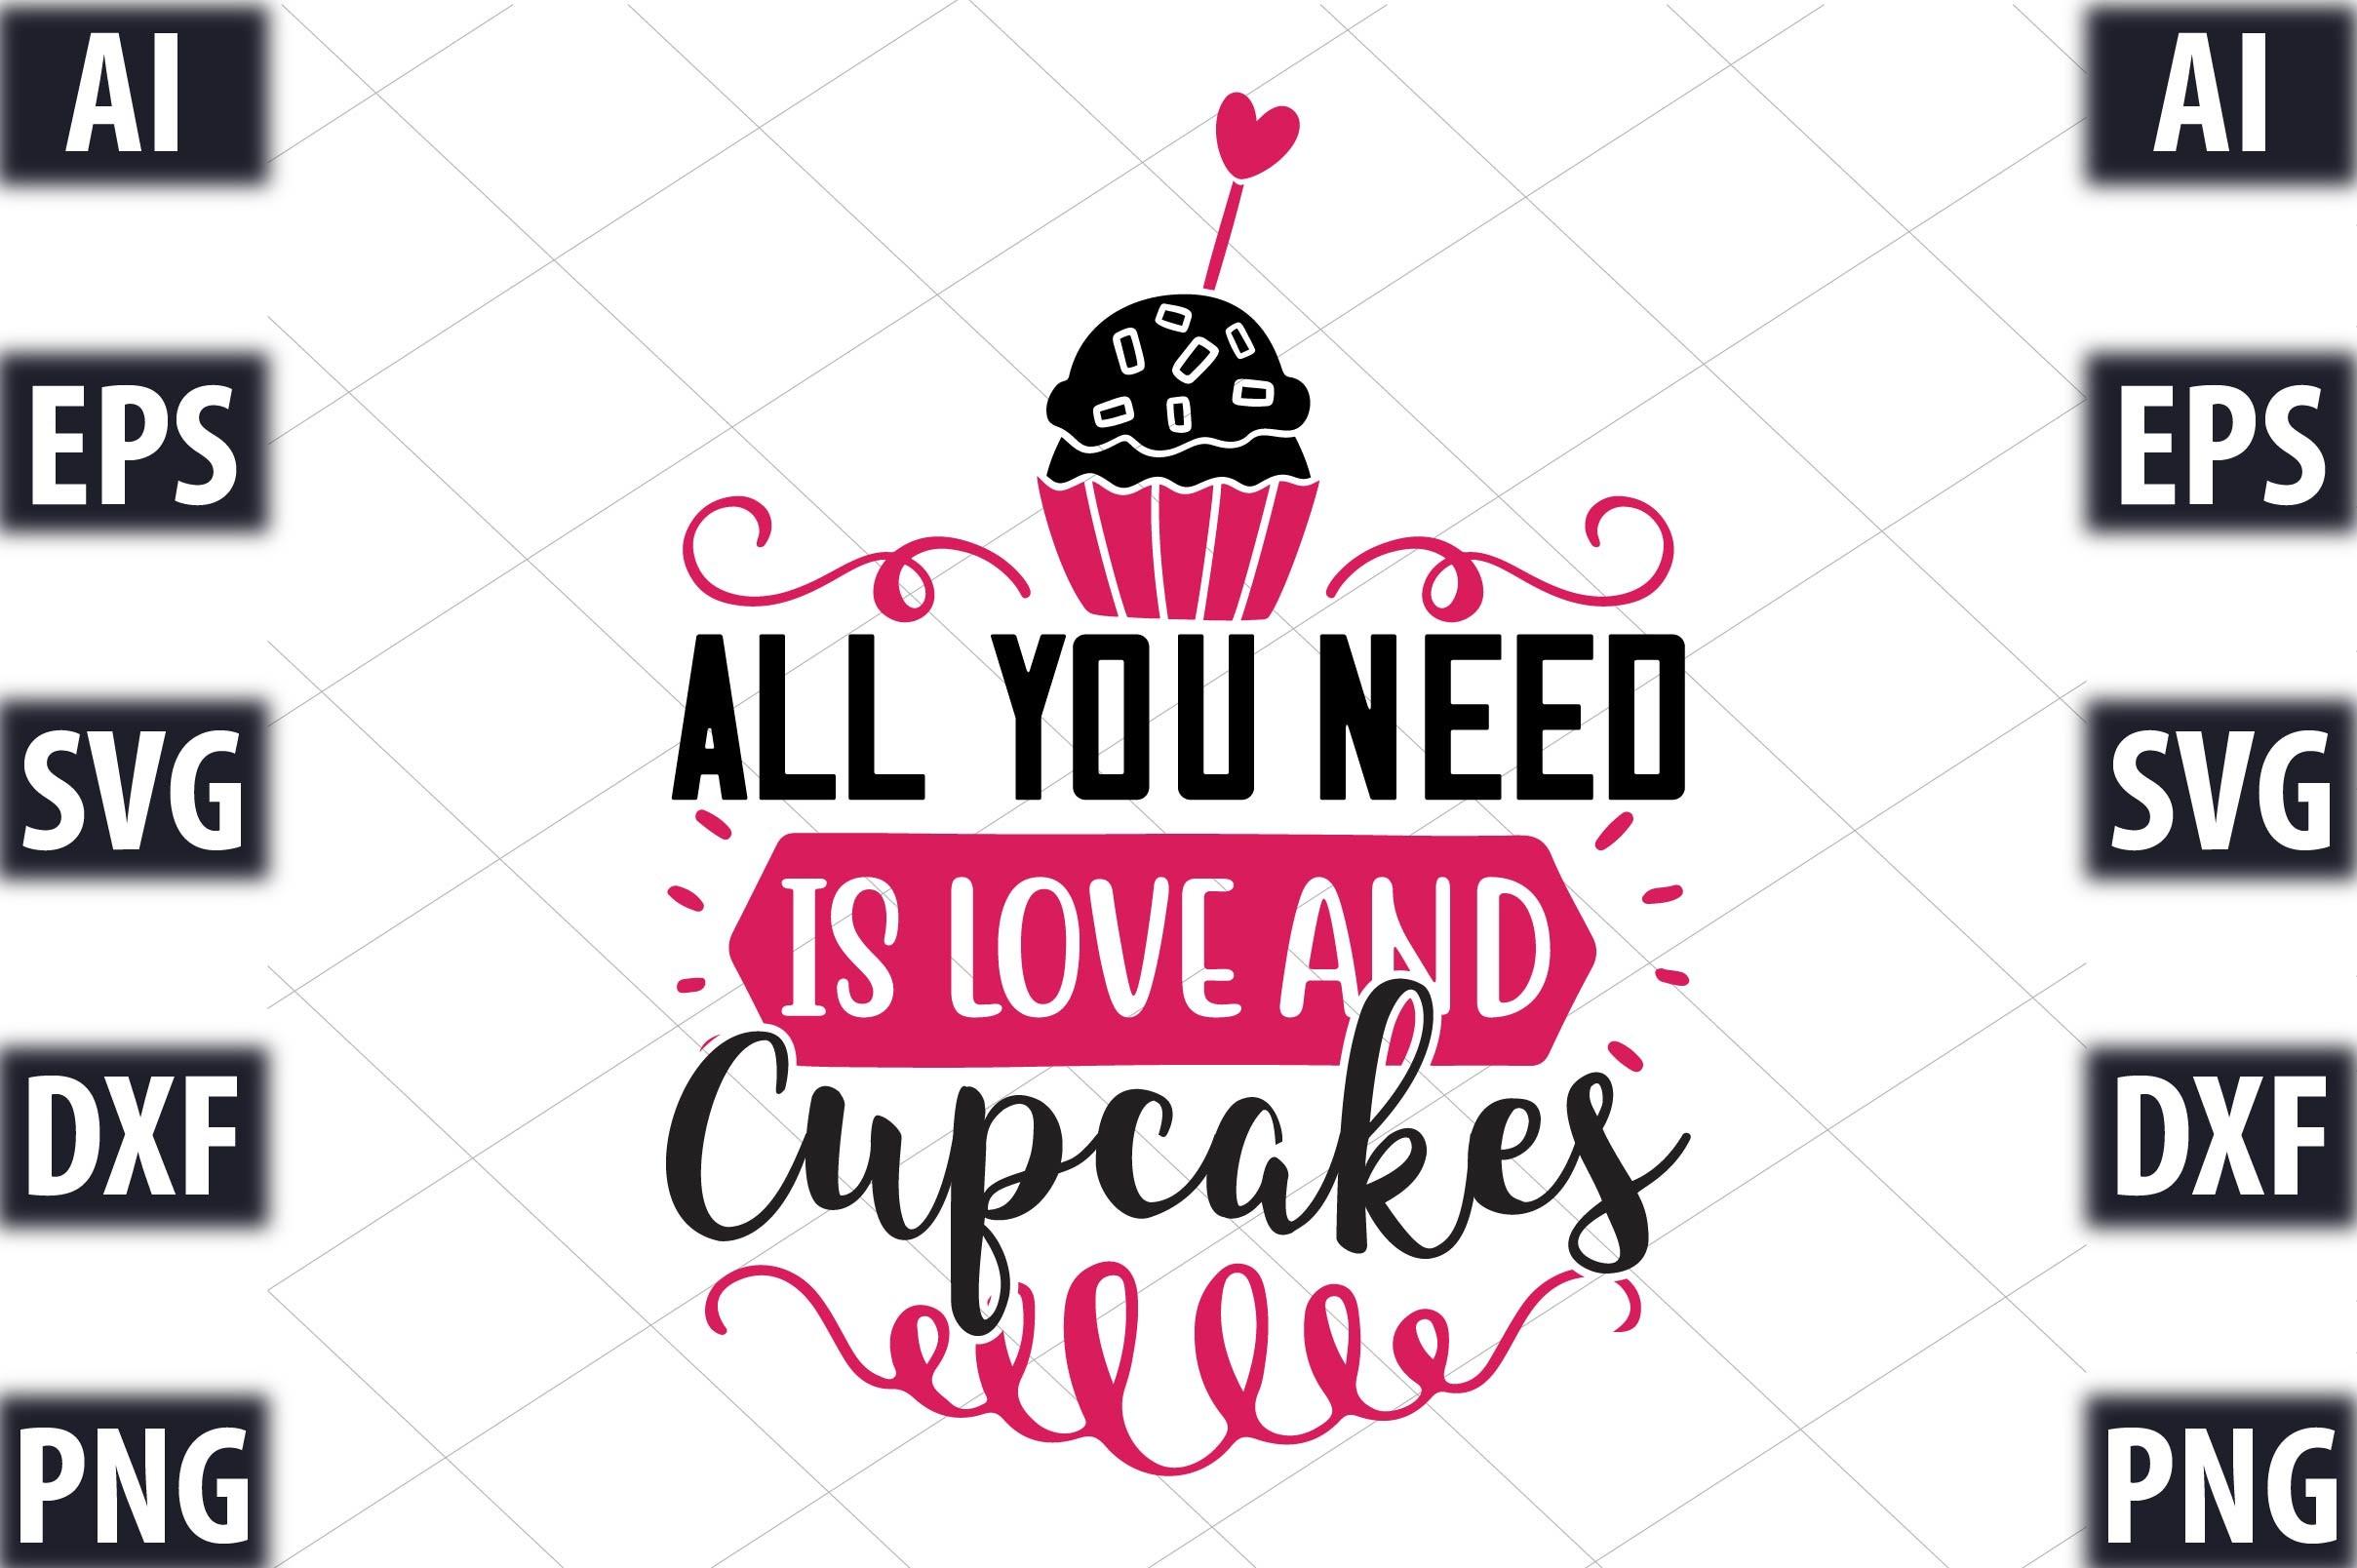 All You Need is Love and Cupcakes